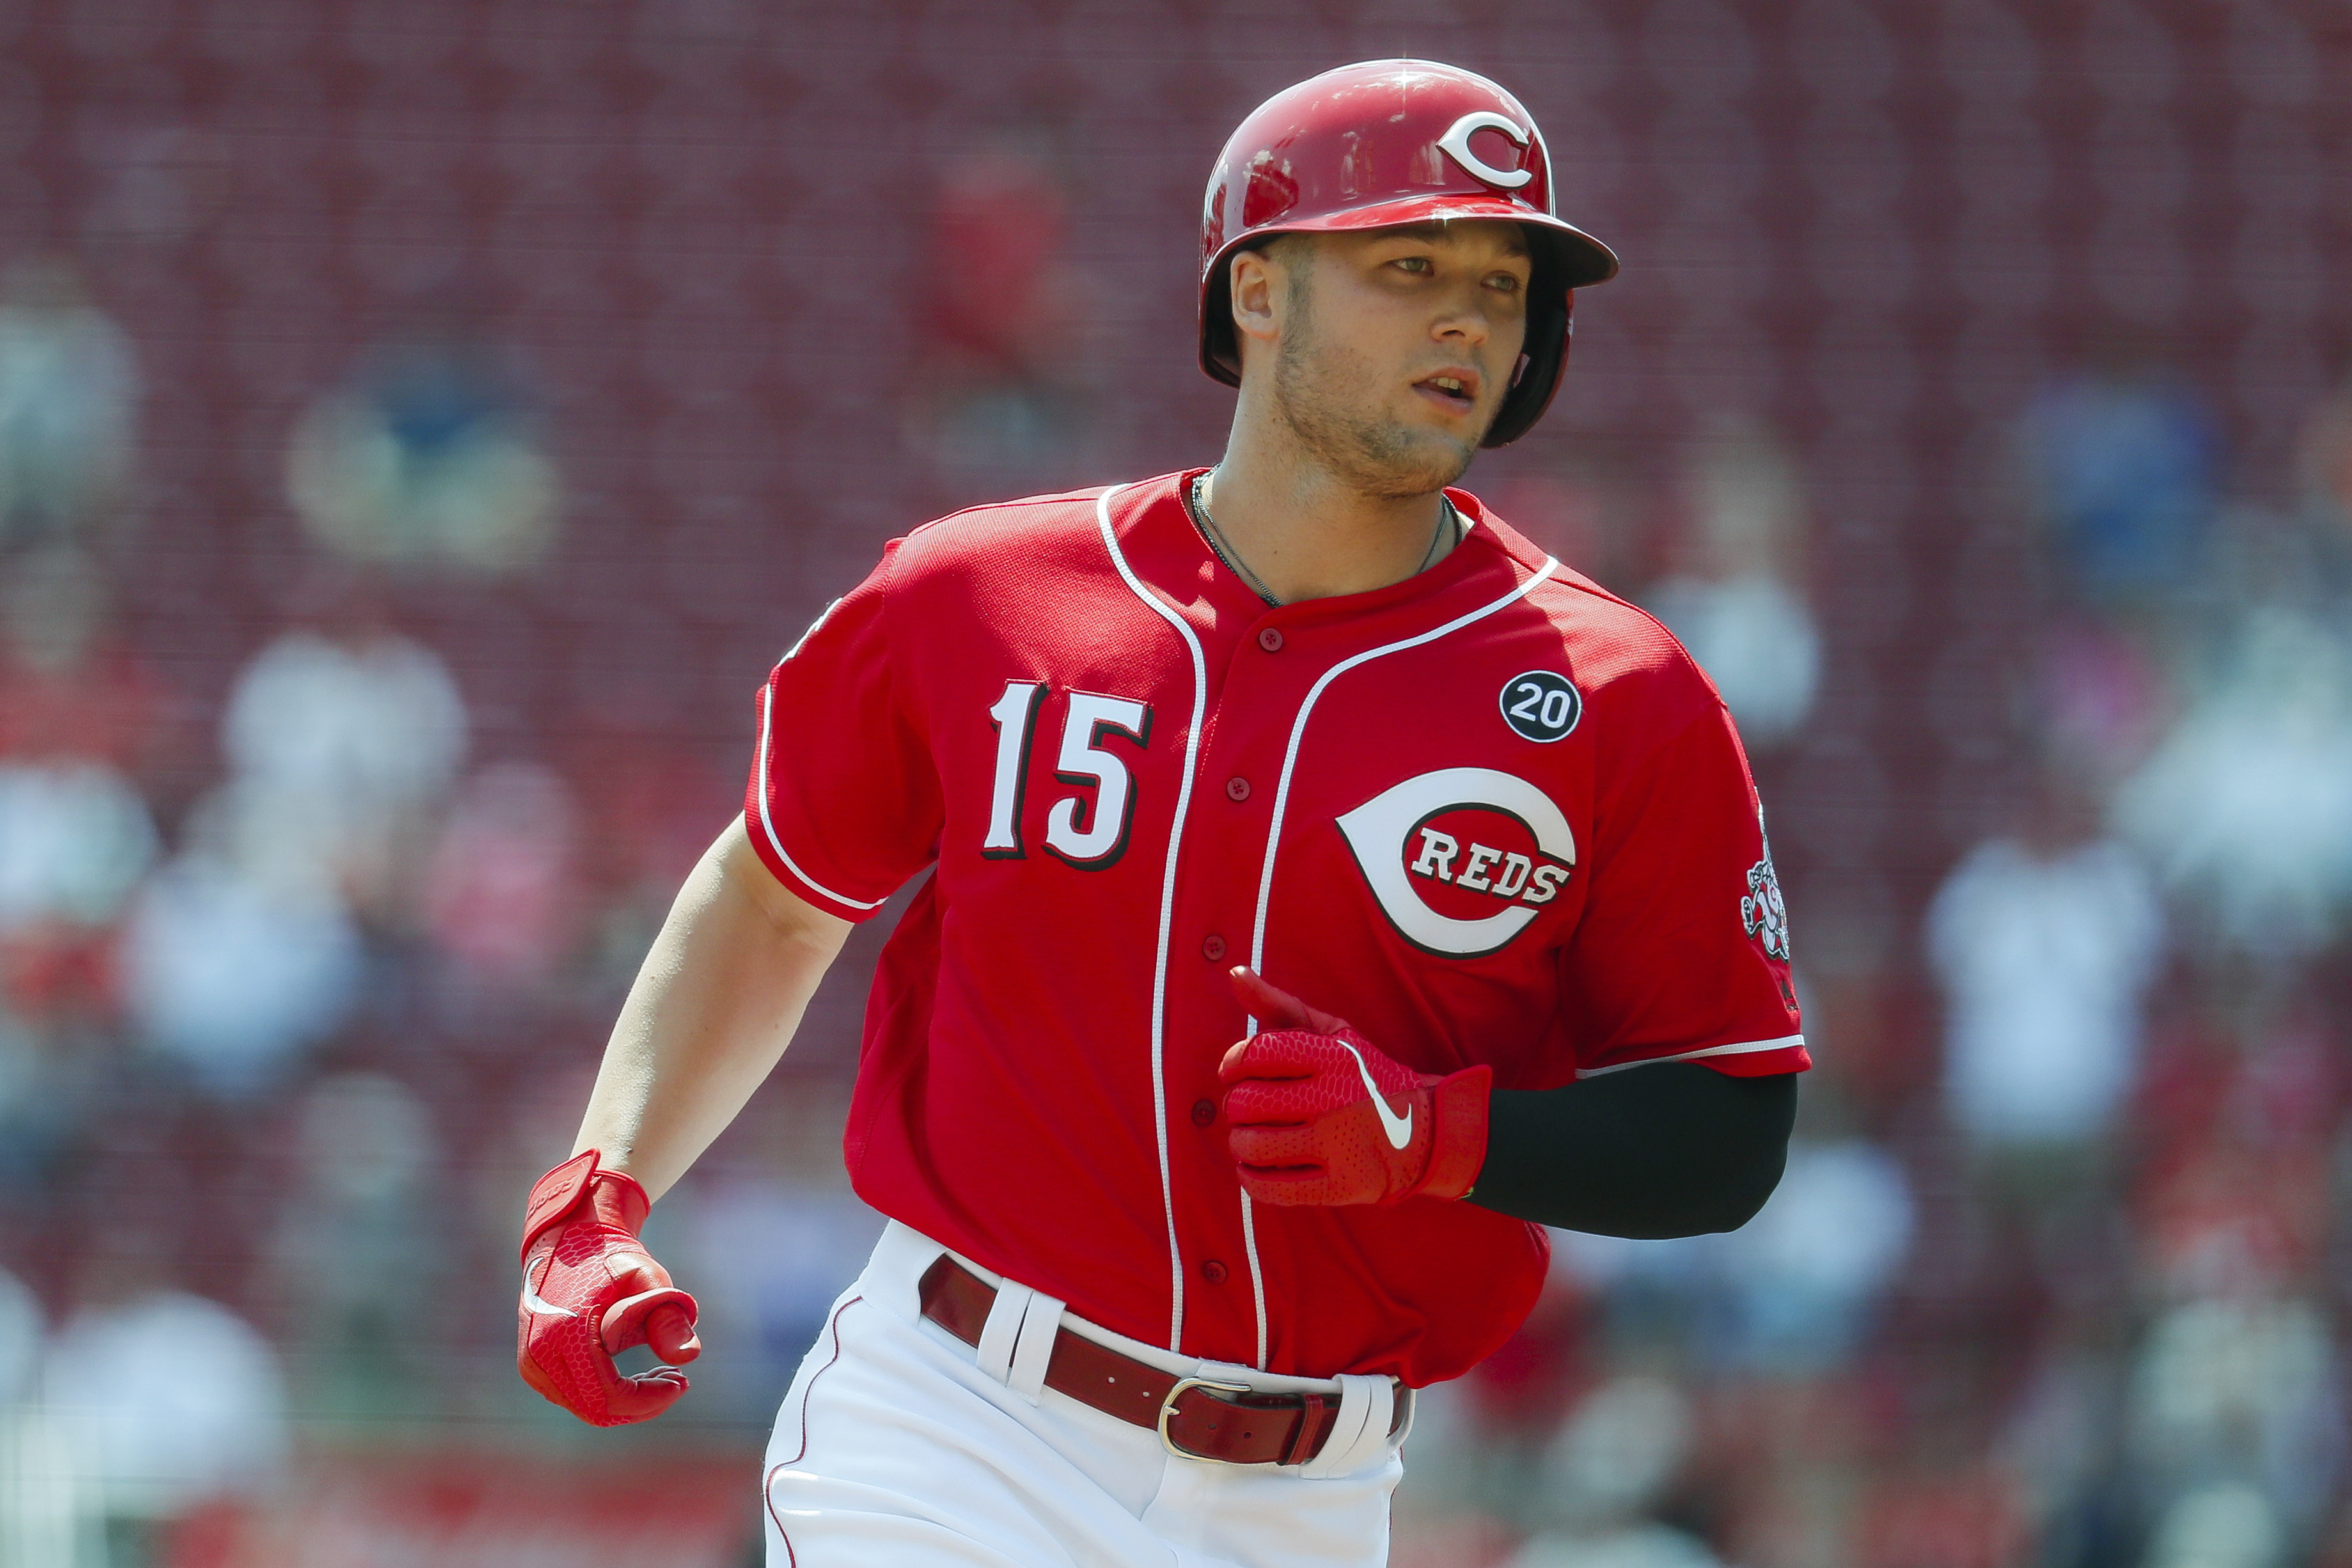 Bees circle, Senzel homers twice as Reds swarm Giants 12-4